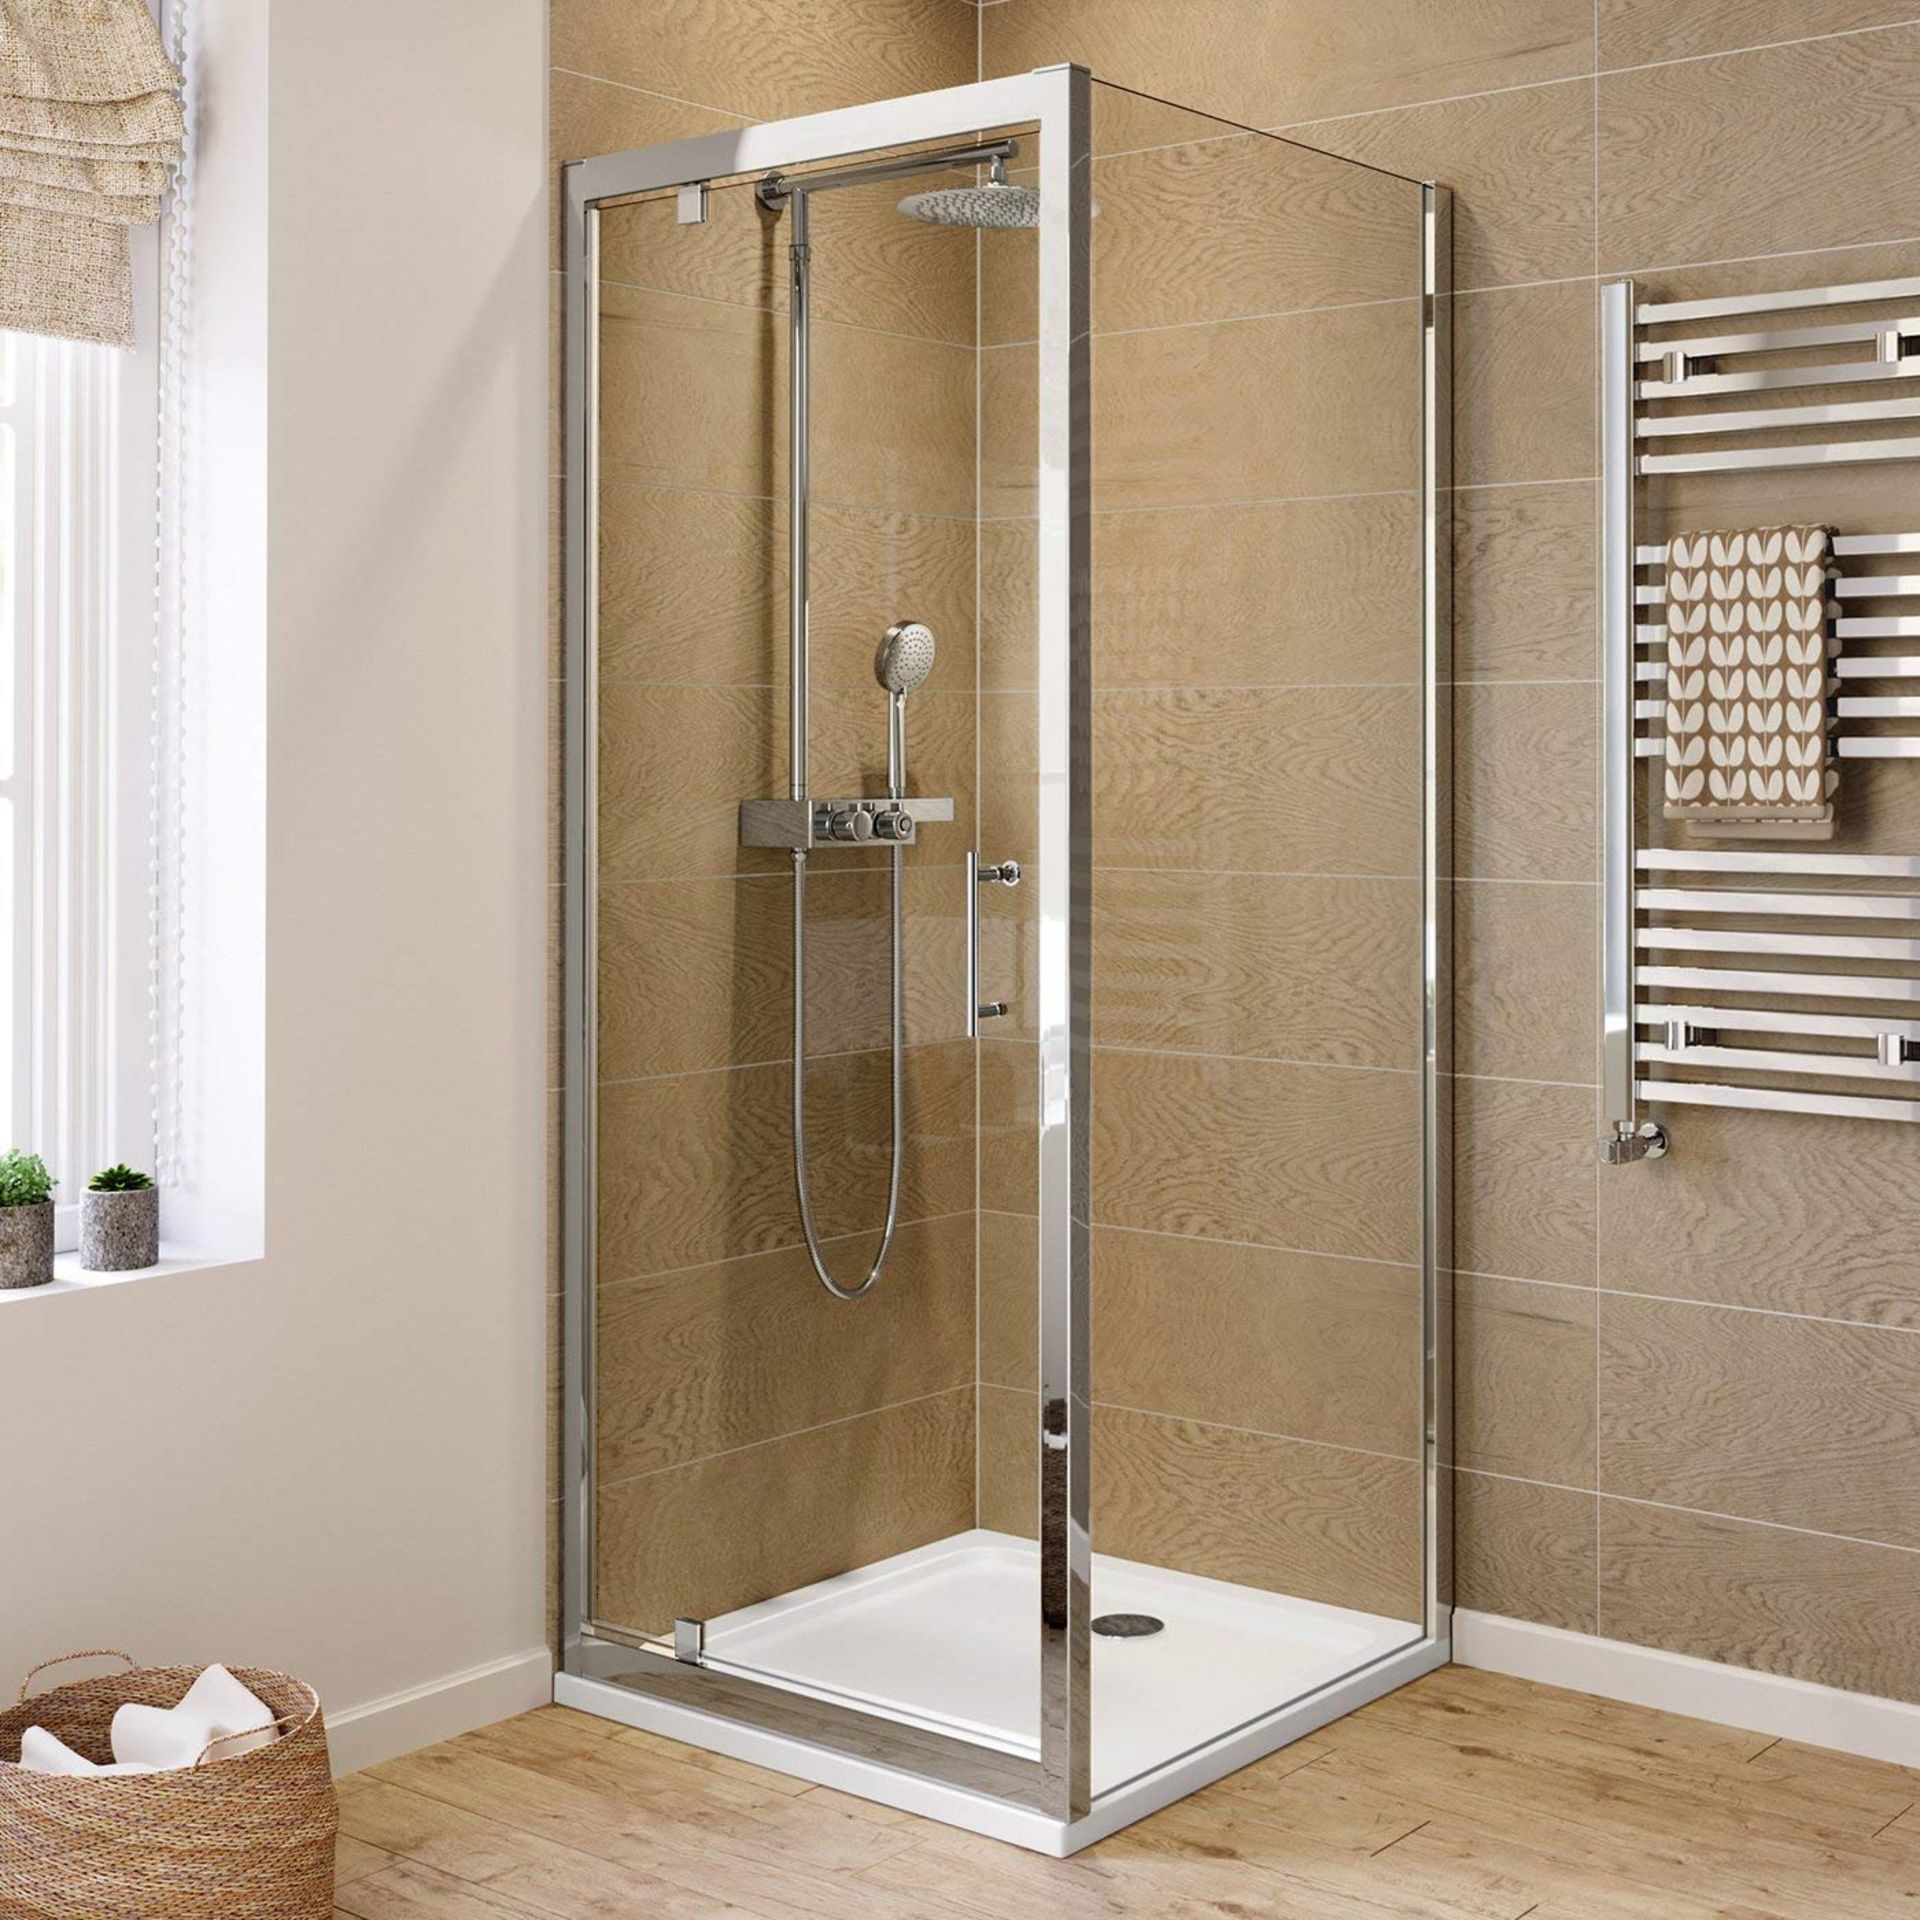 Twyfords 700x700 Pivot Hinged 8mm Glass Shower Enclosure Reversible Door + Side Panel. RRP £34...